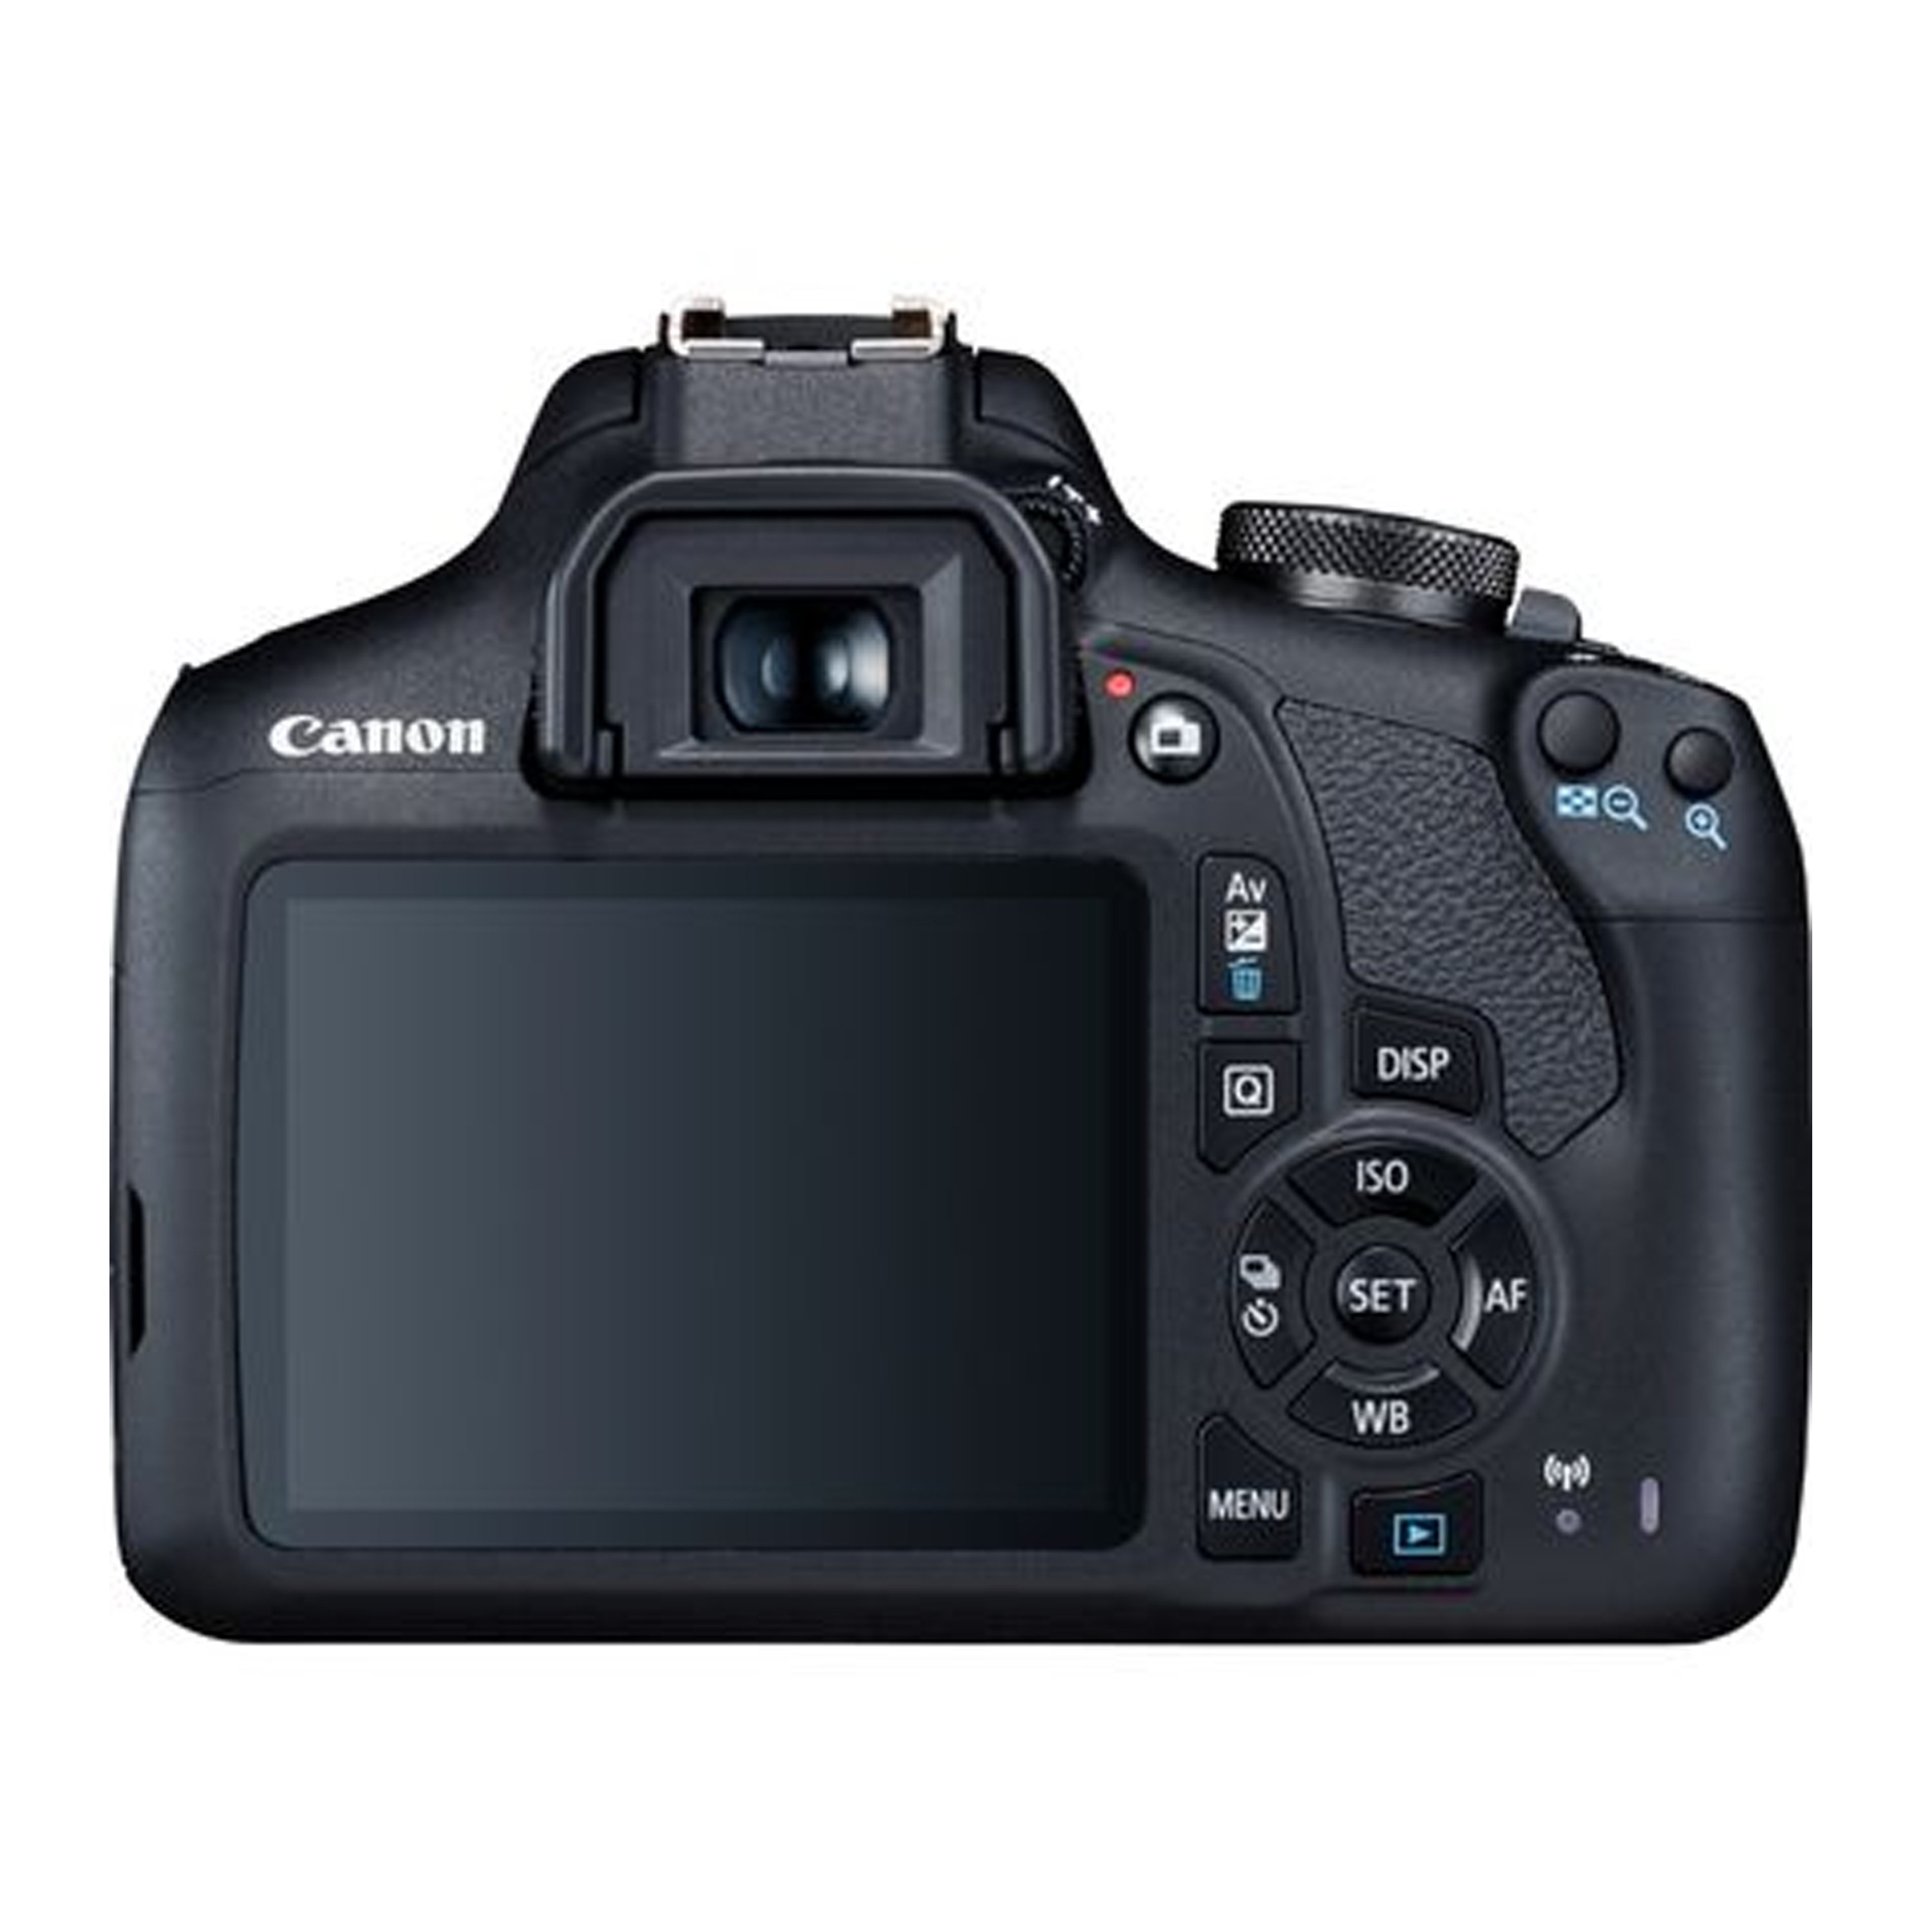 Canon EOS 2000D Rebel T7 DSLR Camera with 18-55mm f/3.5-5.6 Zoom Lens + + 128GB Card, Tripod, Flash, and More 20pc Bundle - image 4 of 8